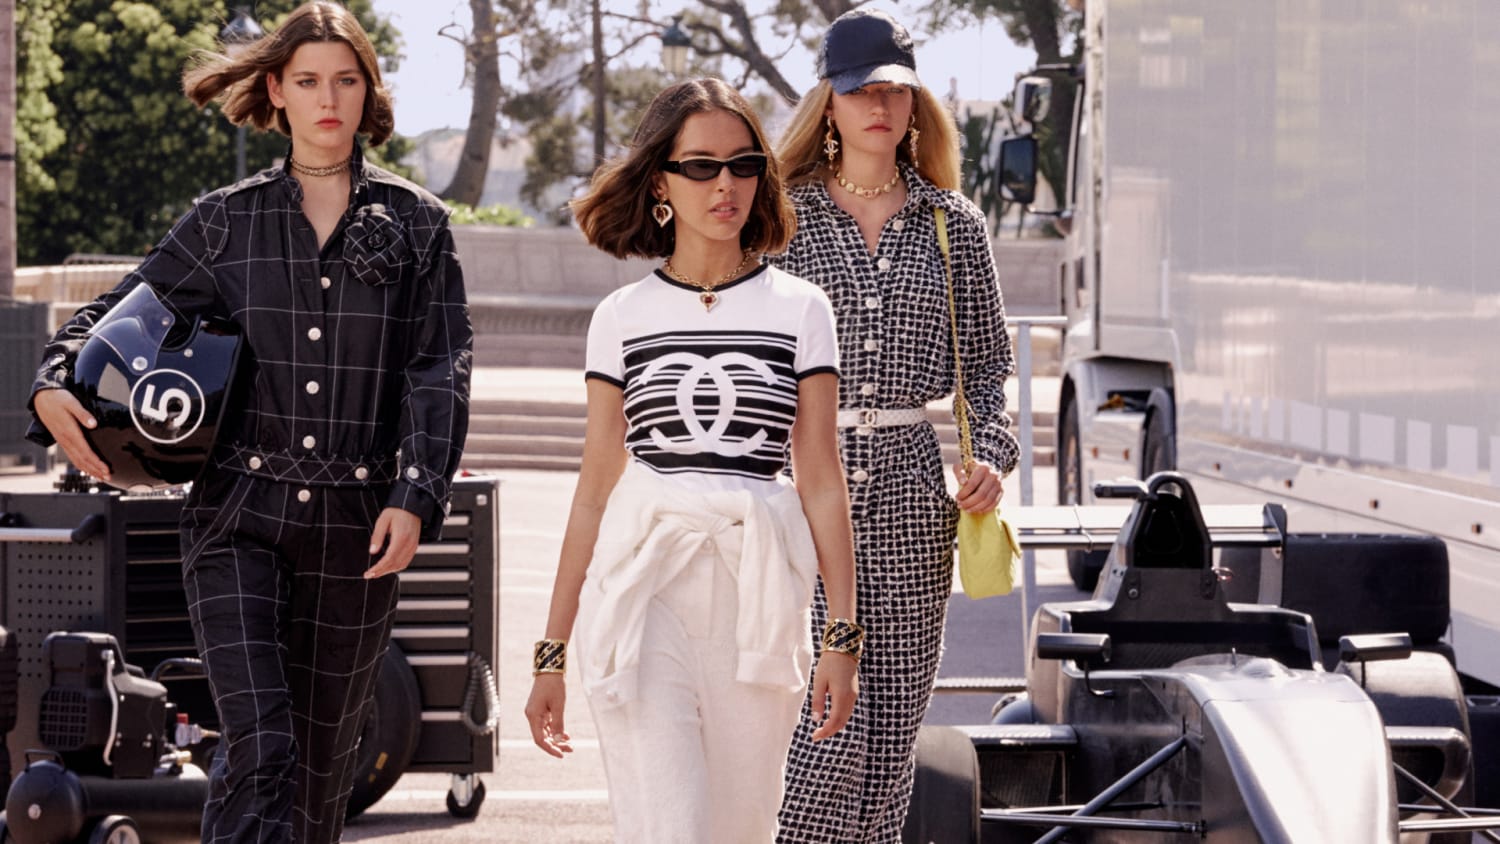 Chanel Cruise show in Monaco was inspired by Formula 1 and the